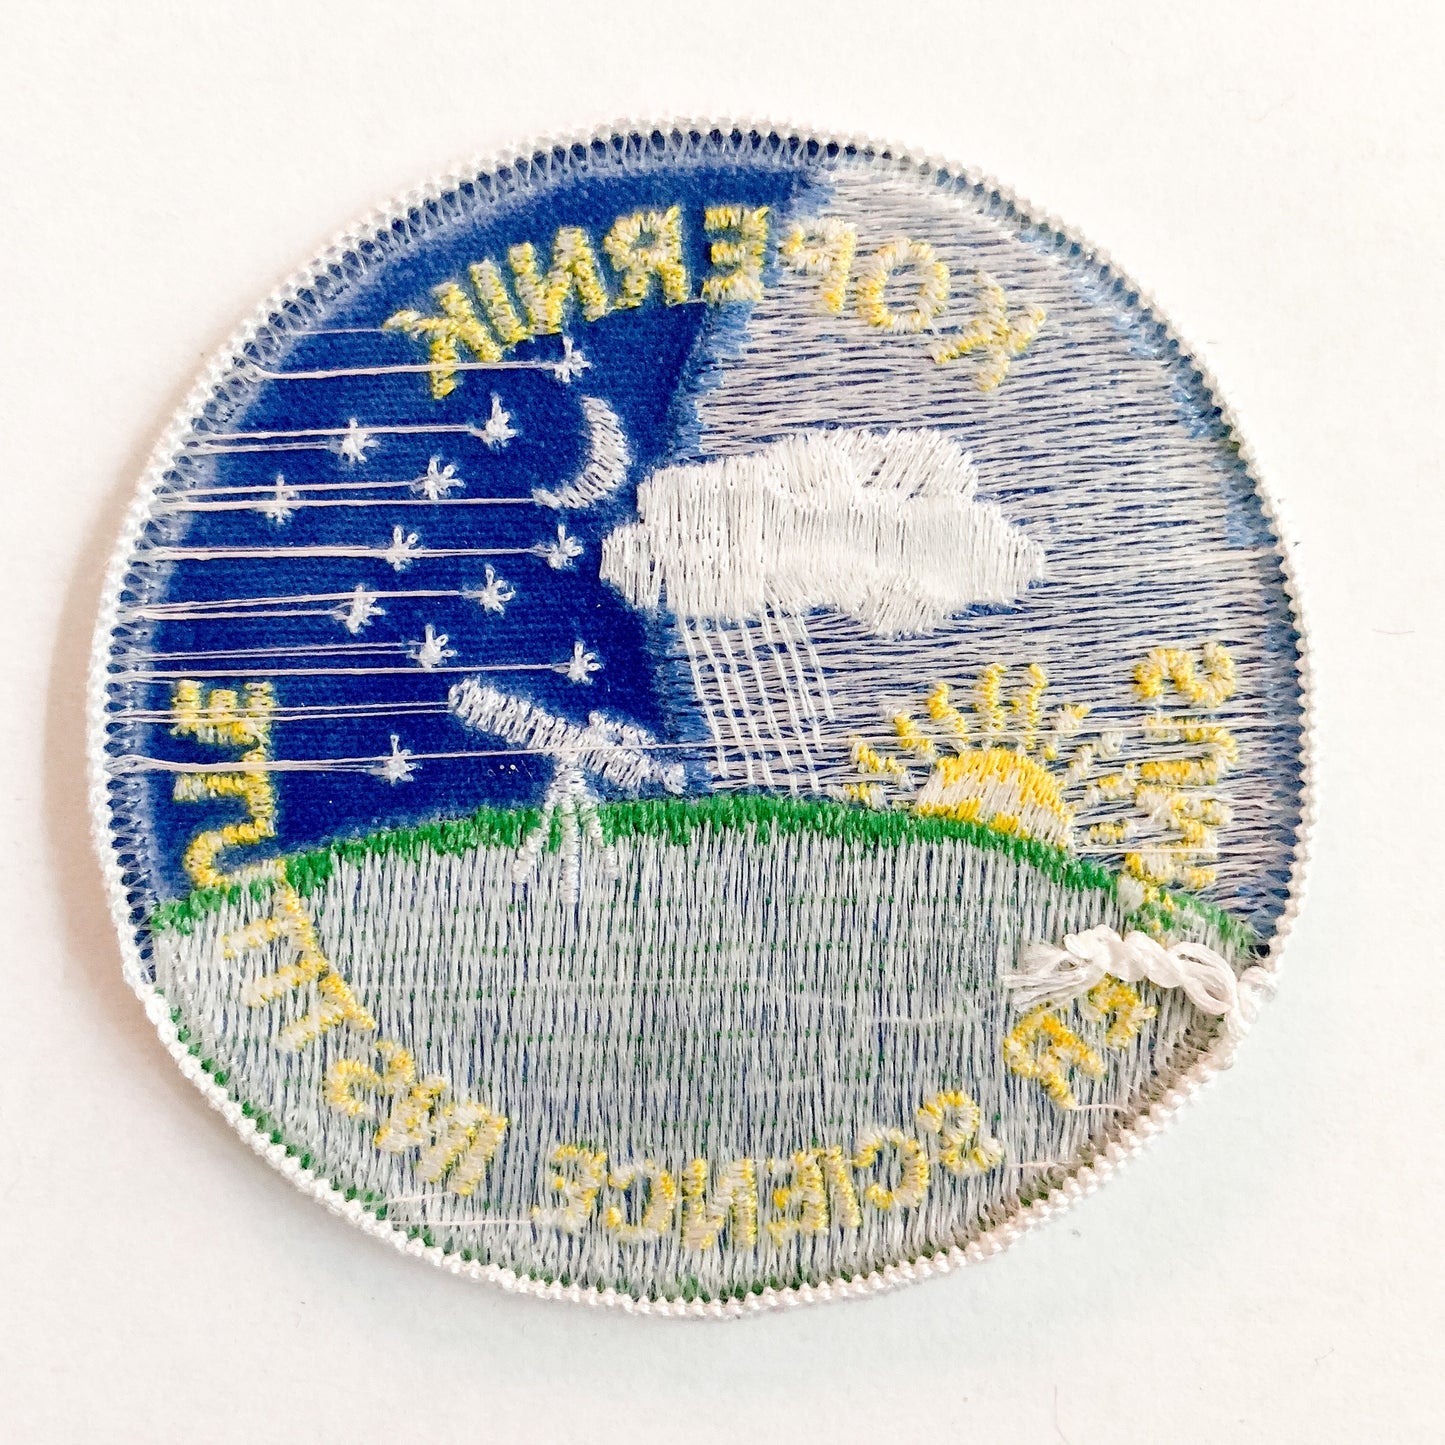 Kopernik Observatory and Science Center Summer Science Institute Iron-on Vintage Patch